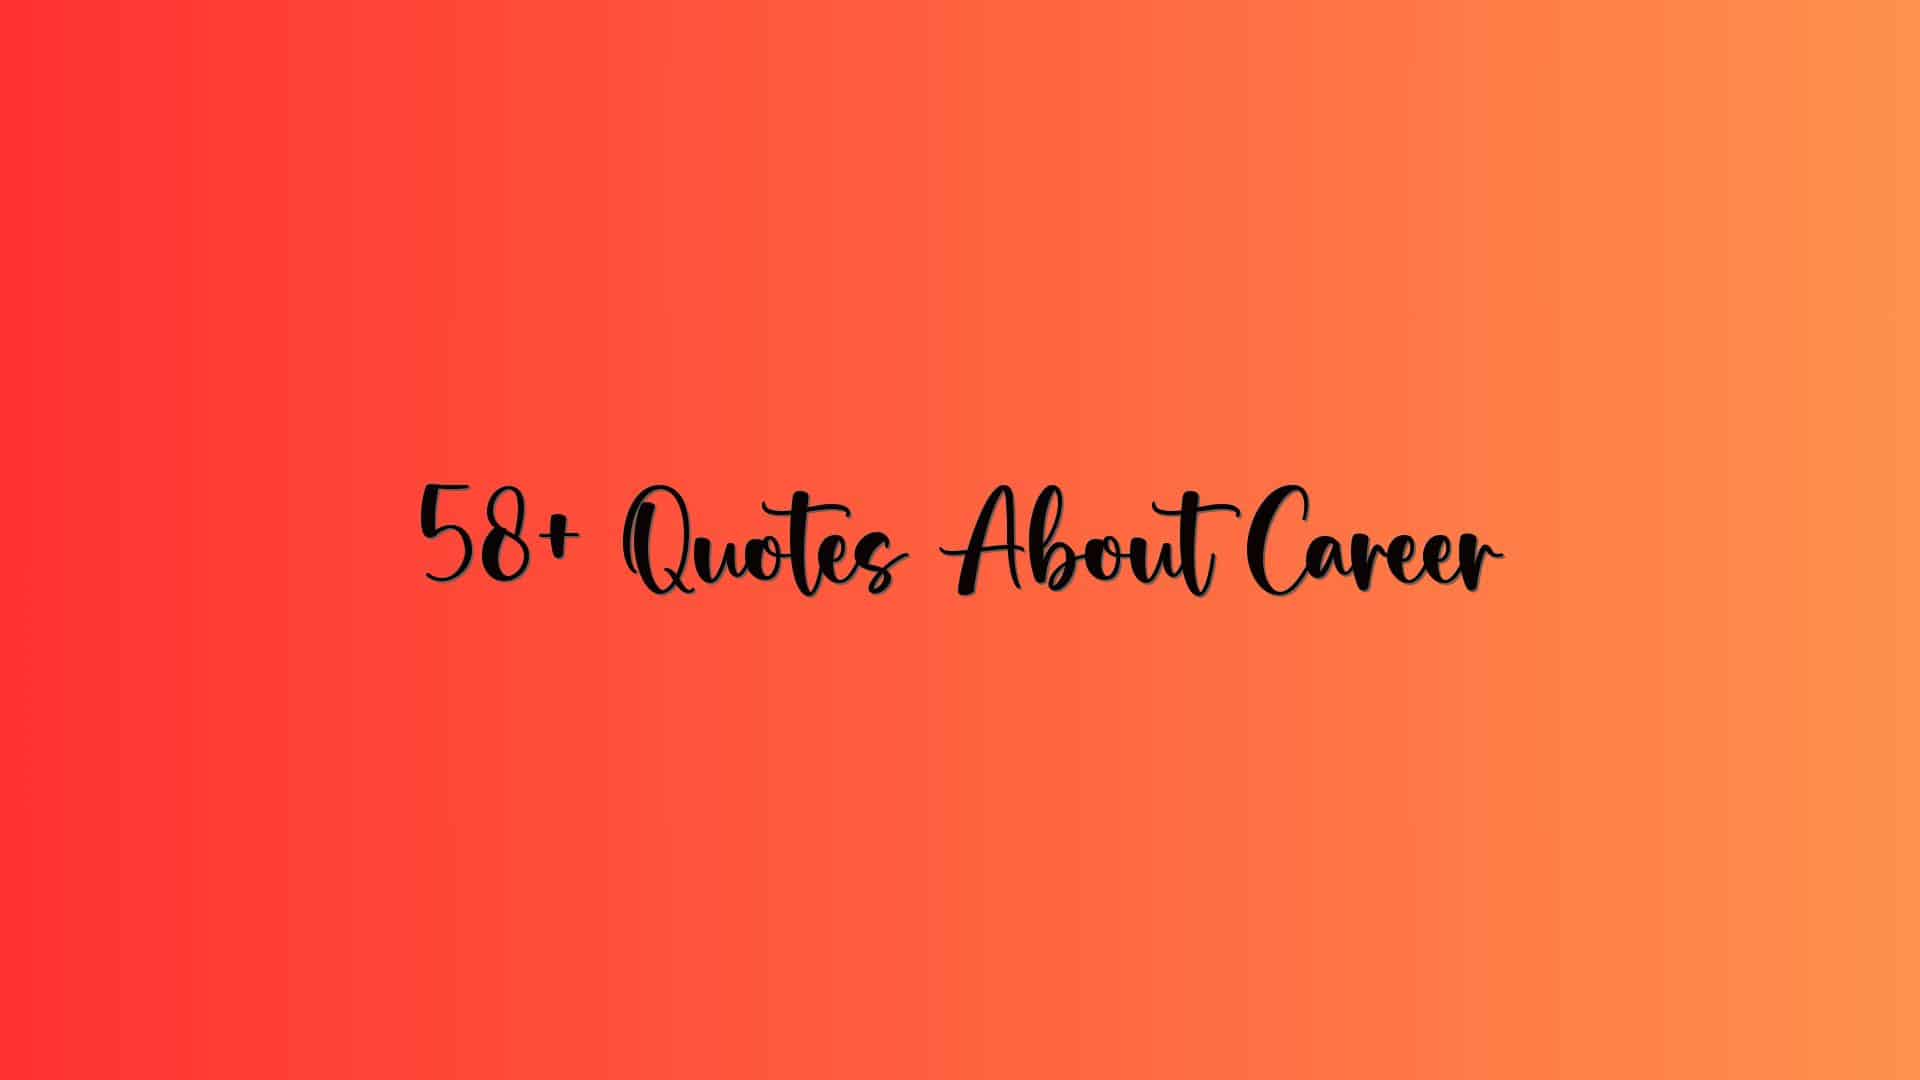 58+ Quotes About Career